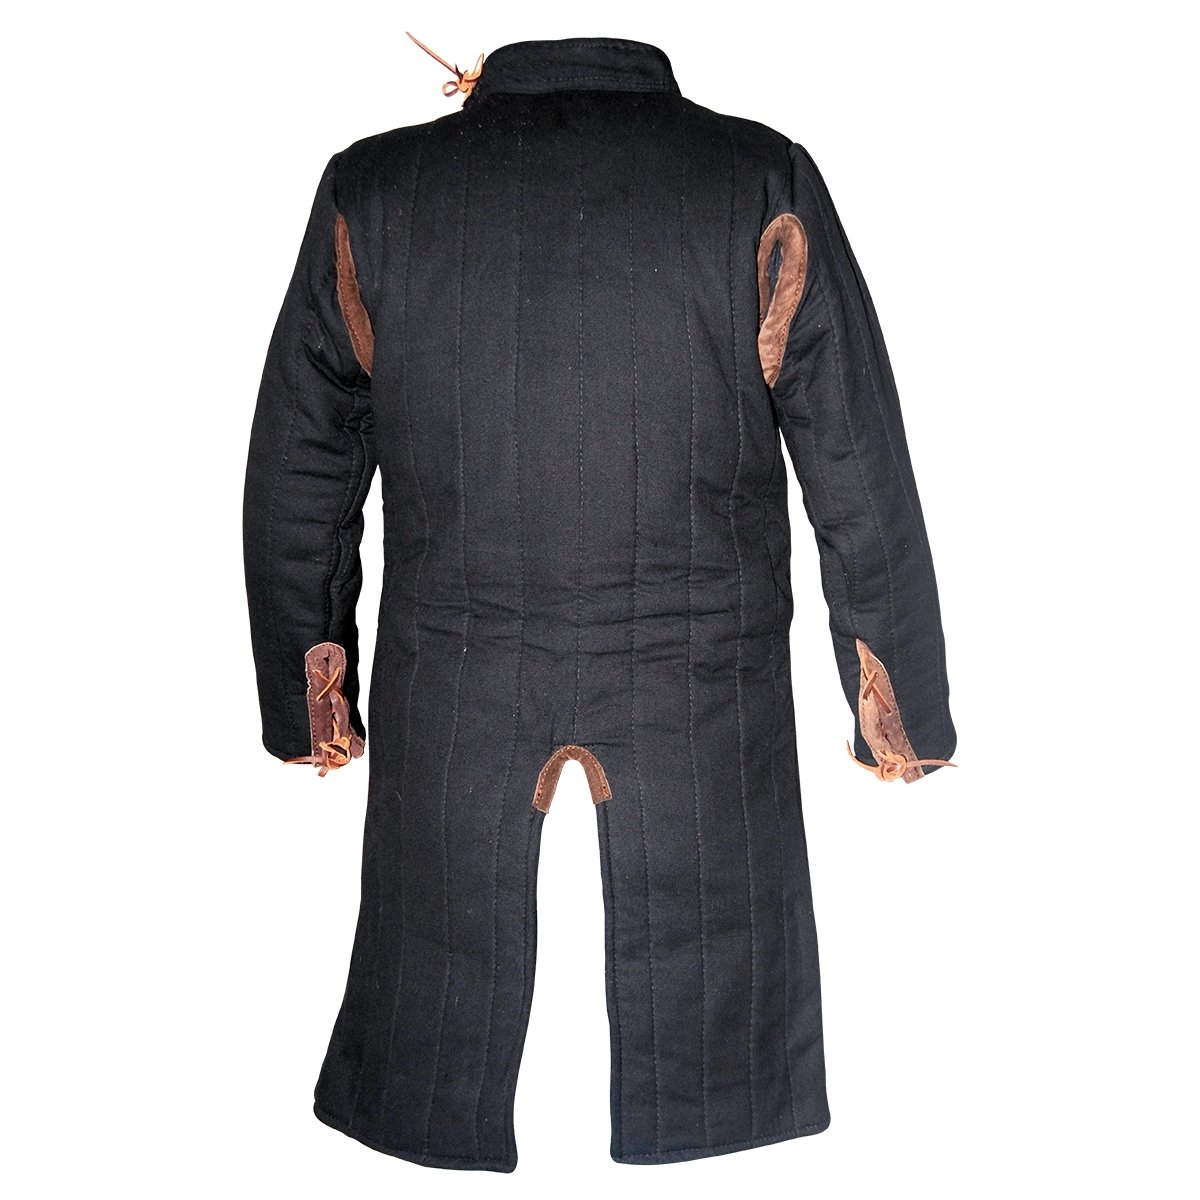 Closed Gambeson Late 12th C./Early 13th C., Black Size M